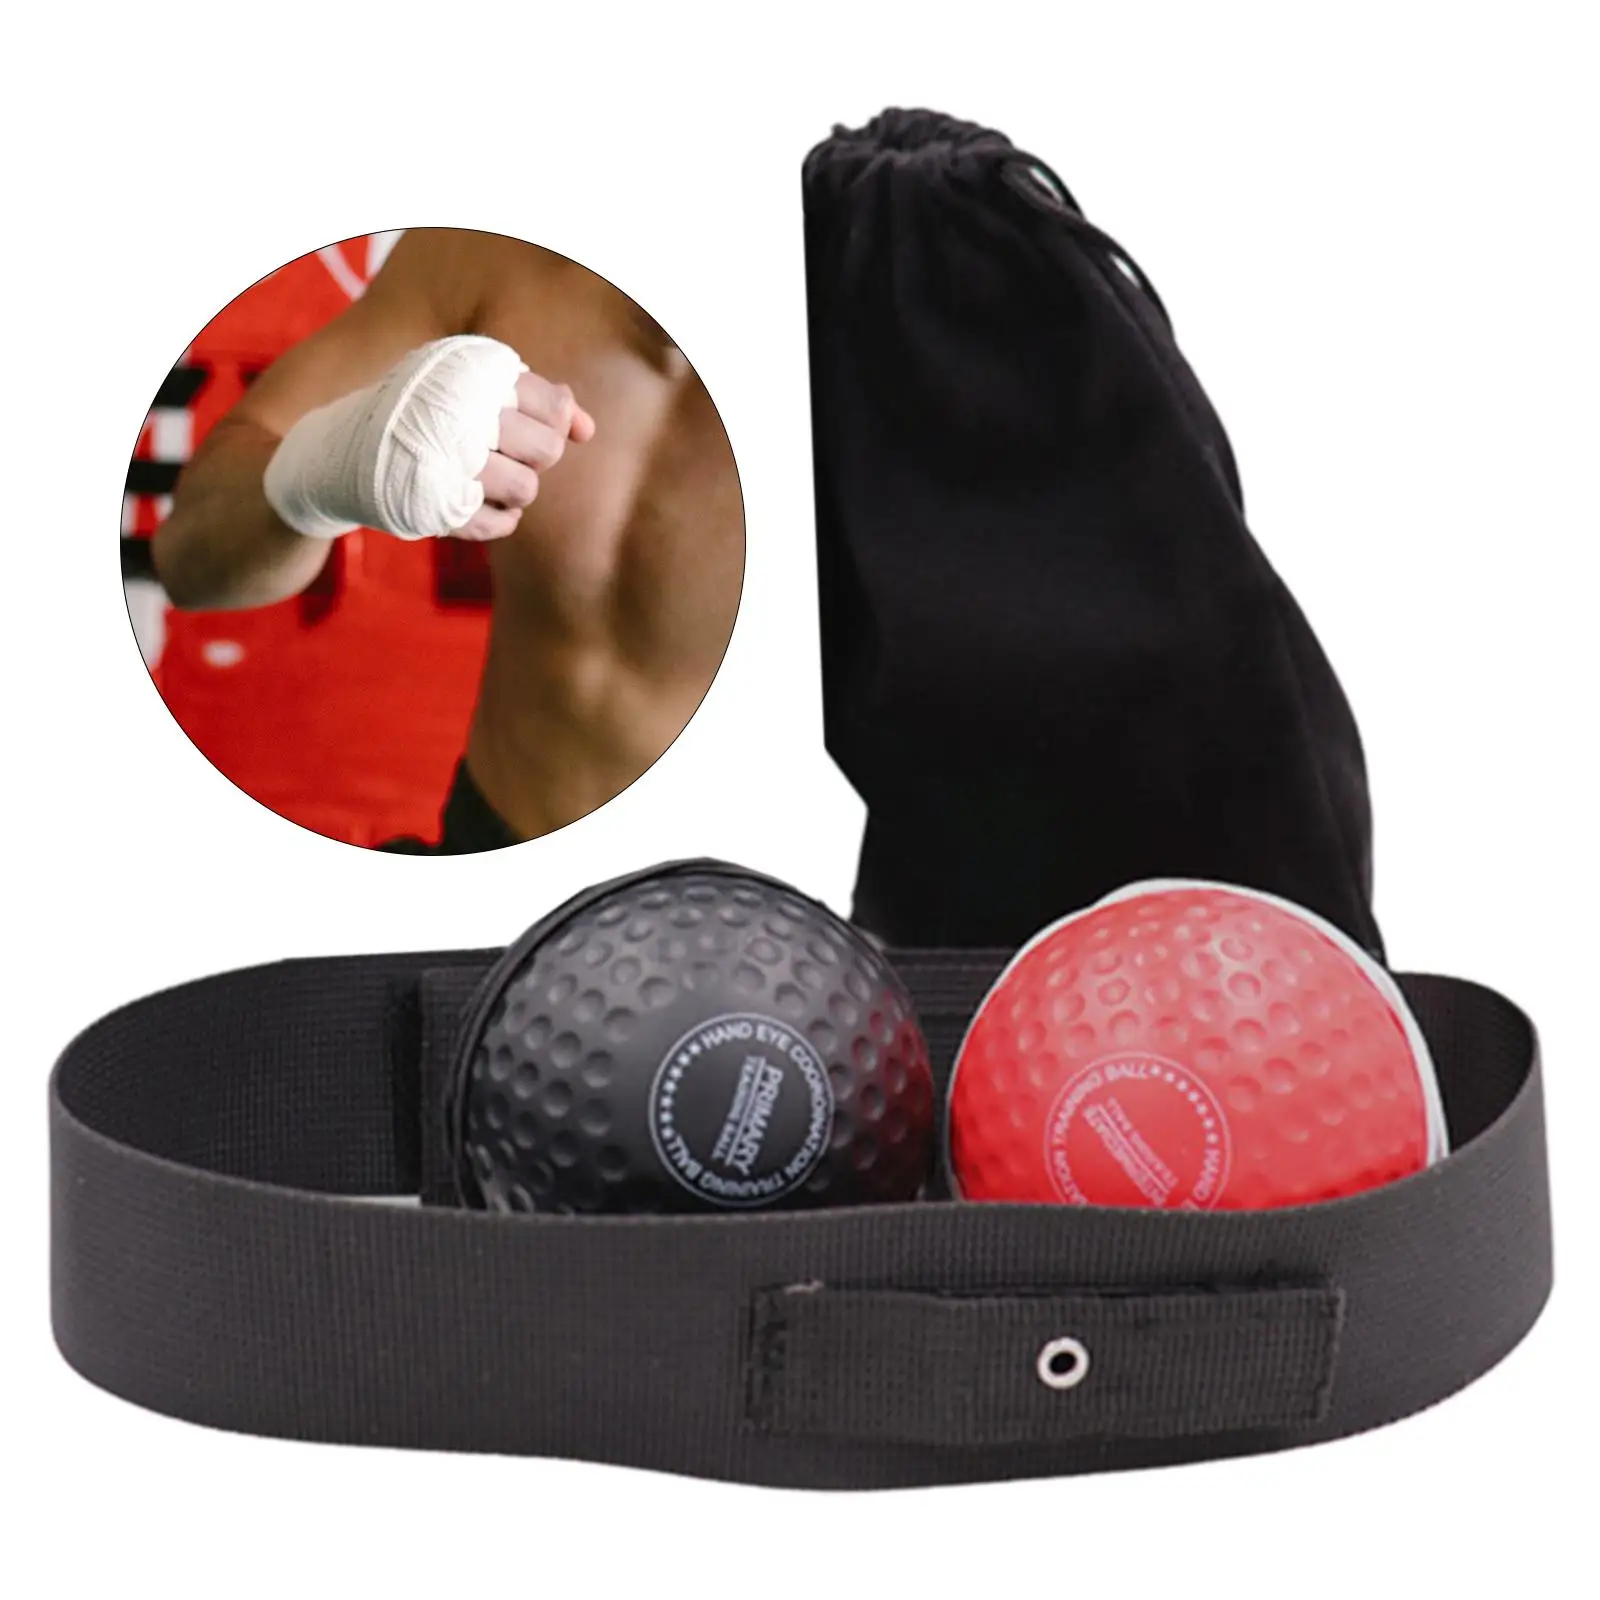 Boxing Reflex Ball Headband Hand Eye Coordination Training Improve Reaction Speed Adjustable for Exercise Fitness Adults